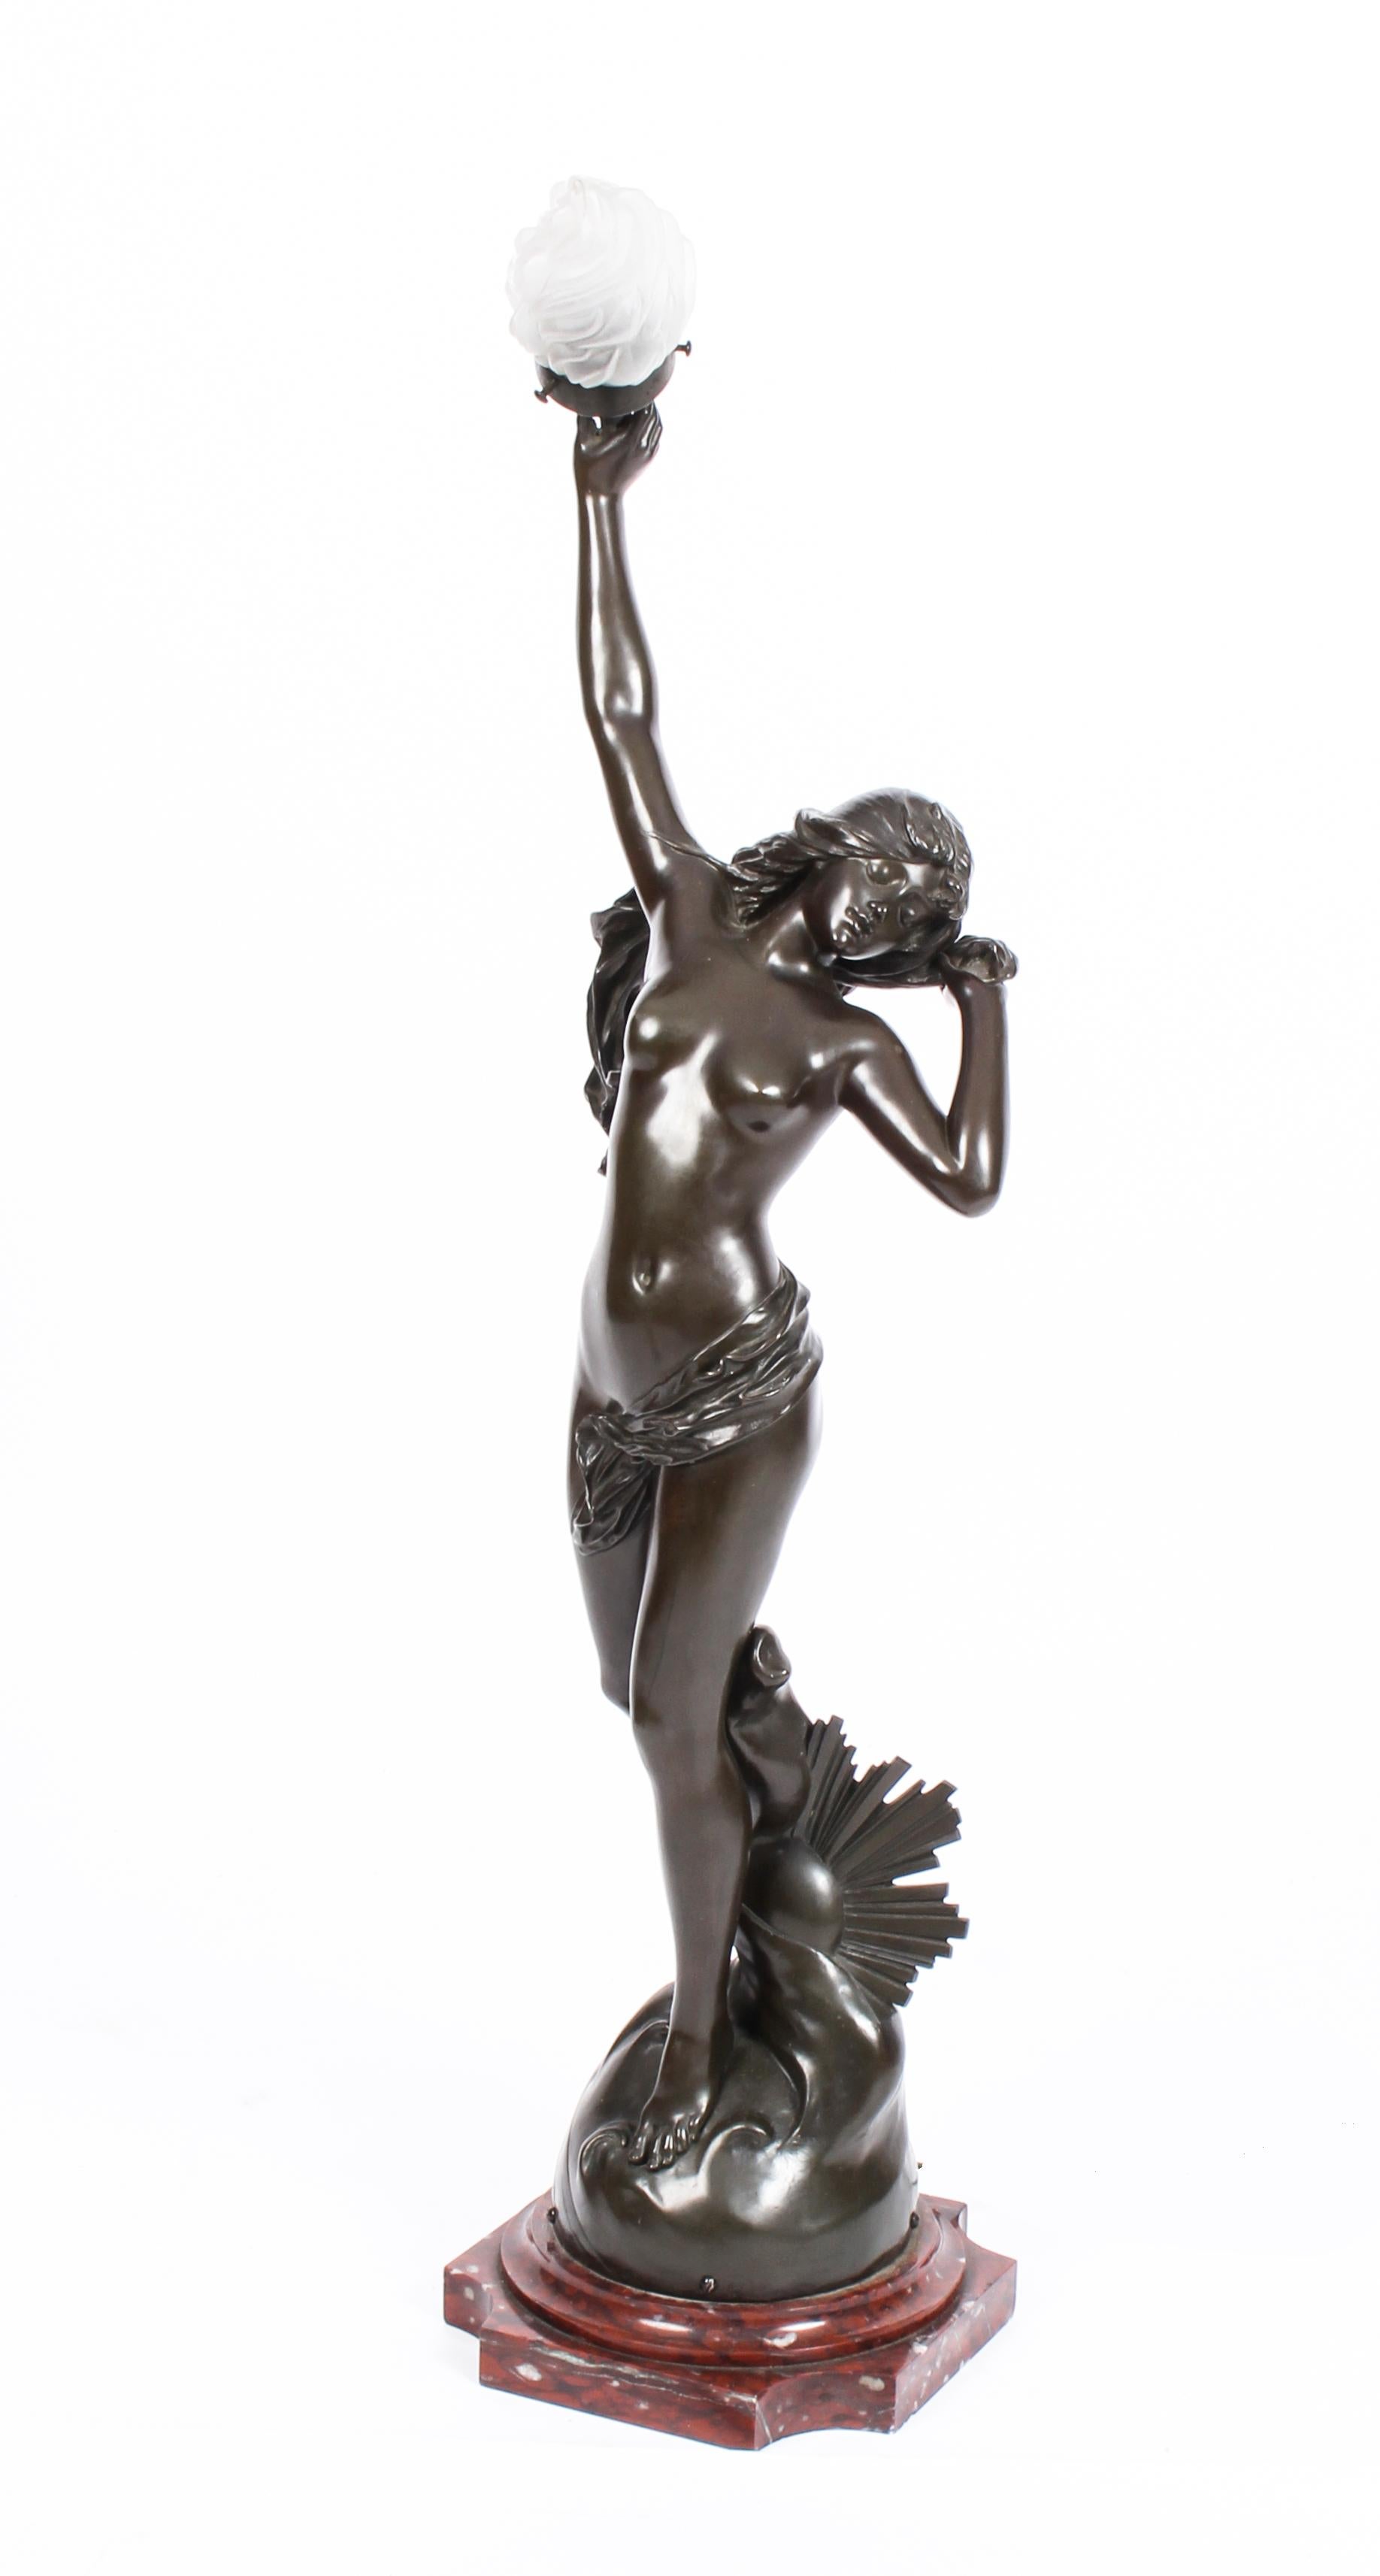 This is a magnificent large antique French bronze lamp depicting the female nude 'Sunset', by the renowned Parisian sculptor Edouard Drout (1859-1945), circa 1890 in date on a stunning antique pedestal, circa 1860 in date.

This striking lamp